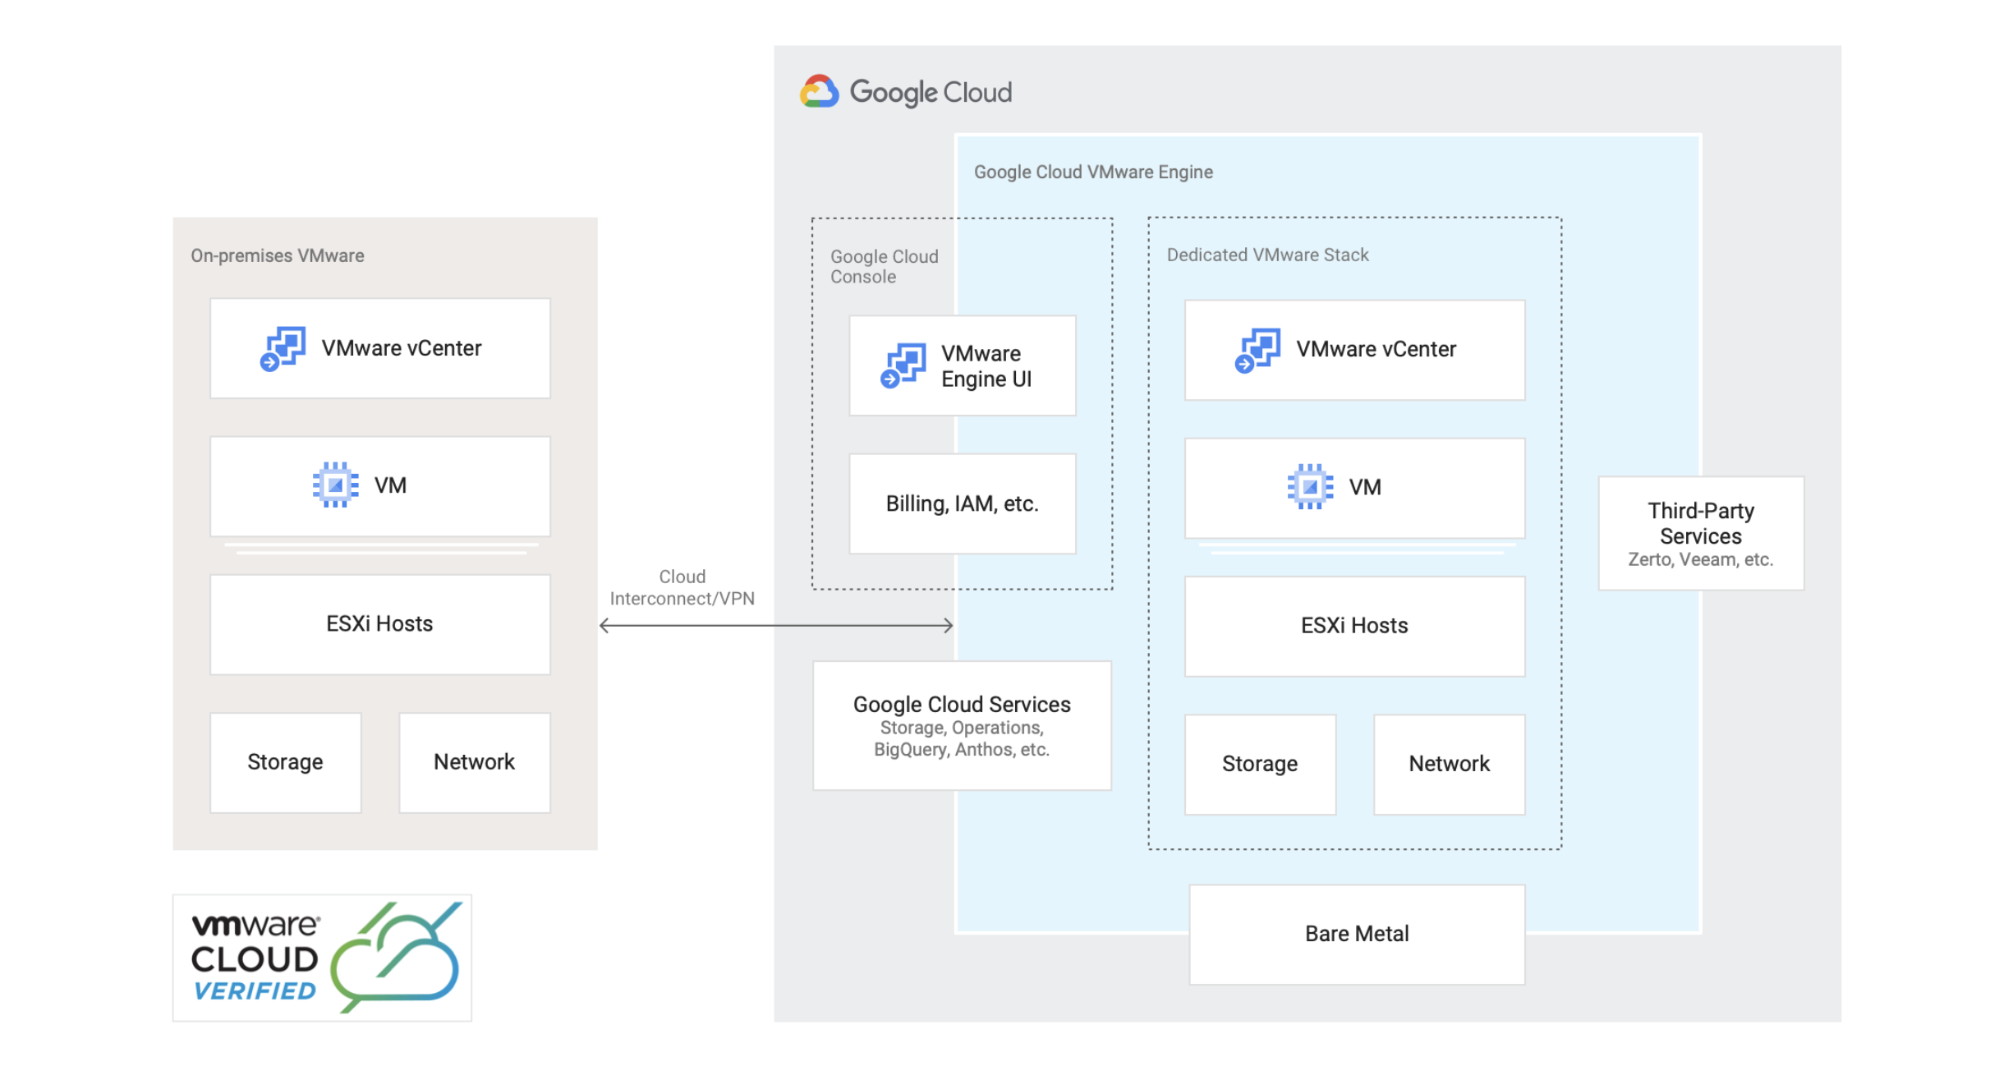 Reference architecture that shows how to migrate or extend your VMware environment to Google Cloud.